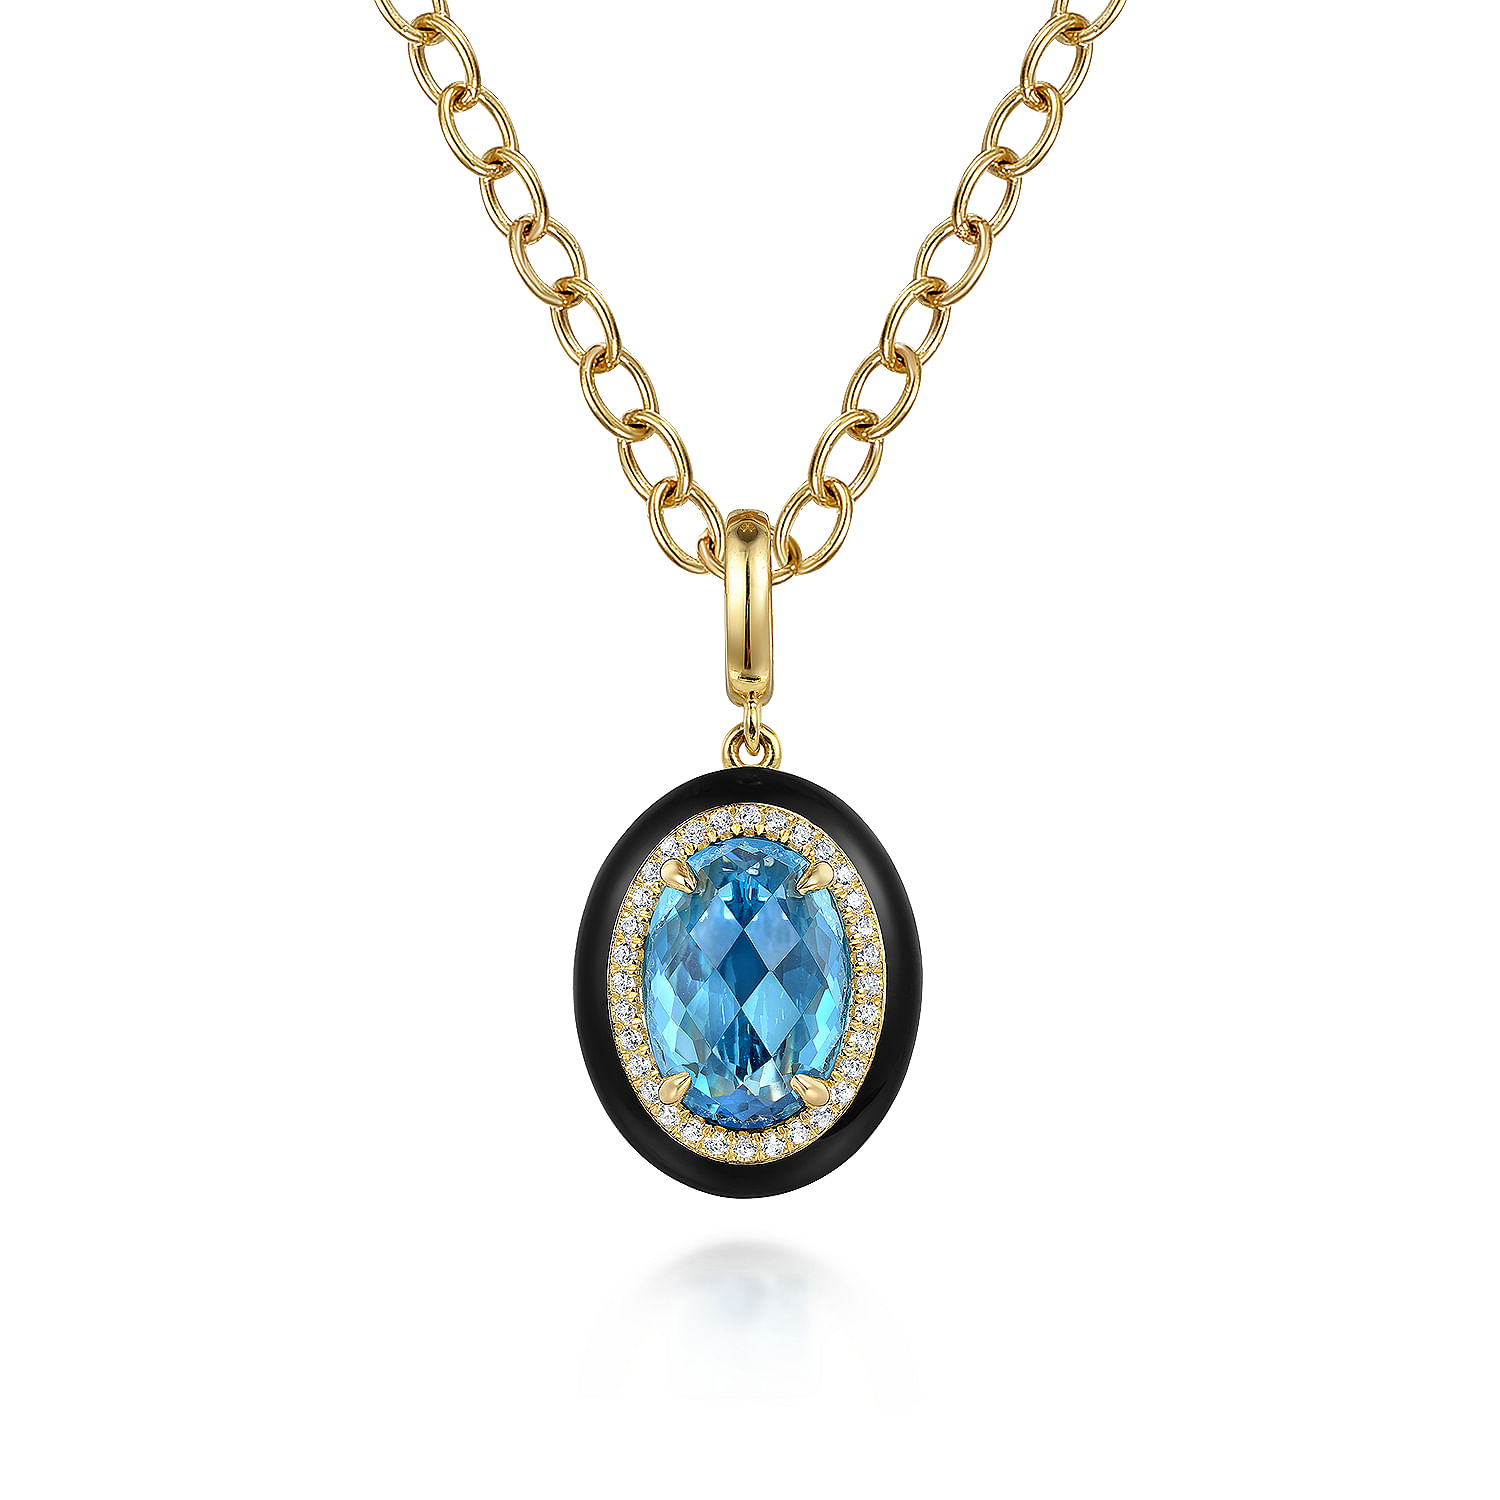 14K Yellow Gold Diamond and Oval Shape Blue Topaz Necklace With Flower Pattern J-Back and Black Enamel